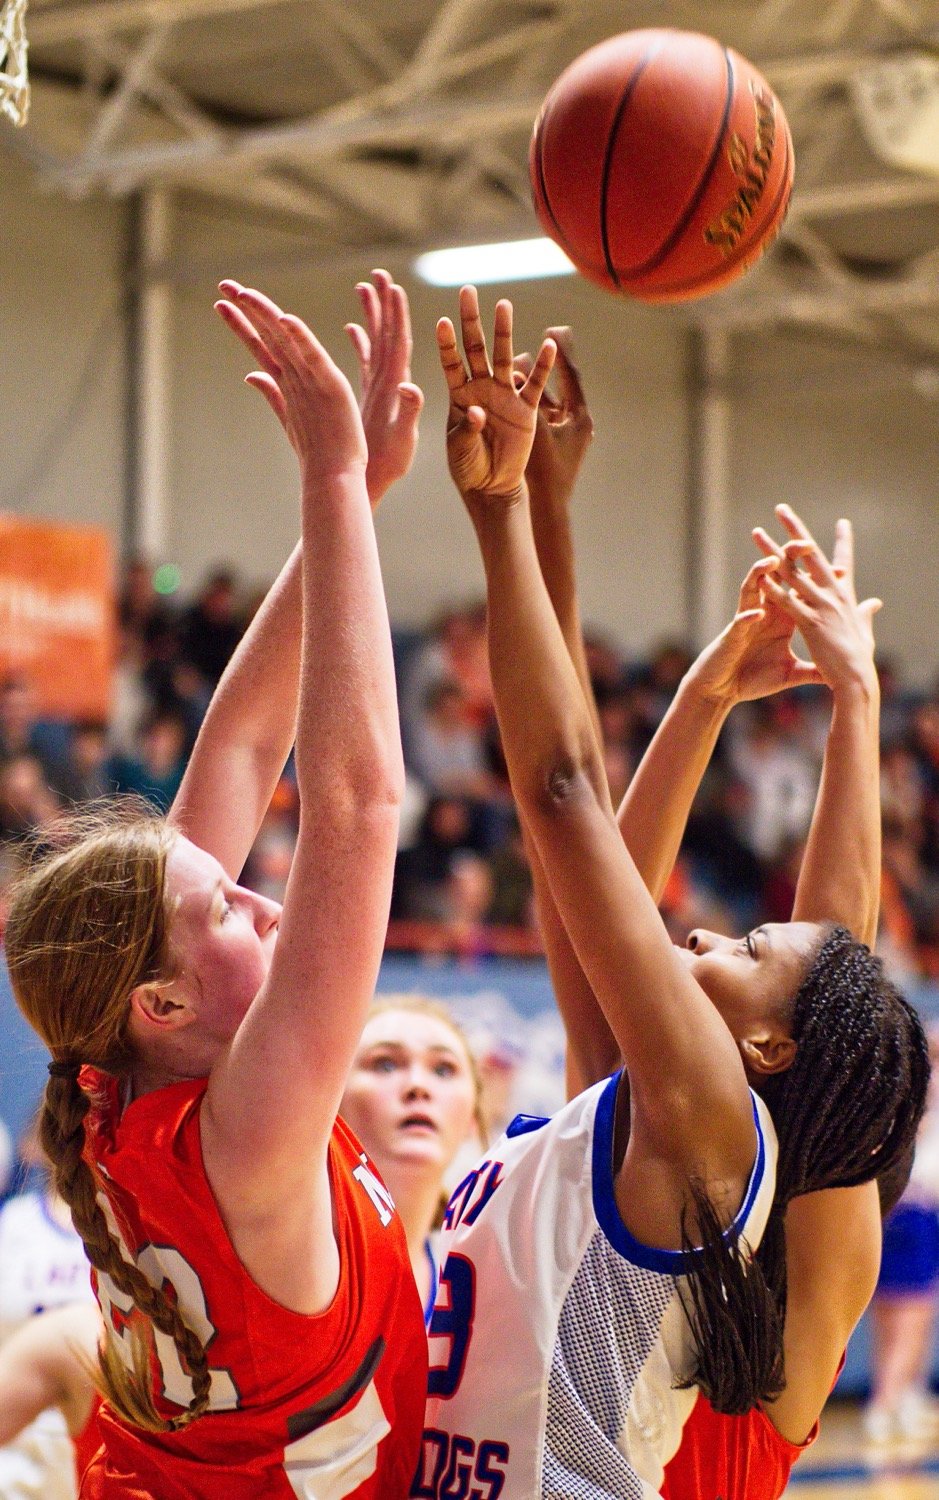 Mineola's Macy Fischer thwarts the shot of Quitman's Allie Berry. [more hoops highlights here]